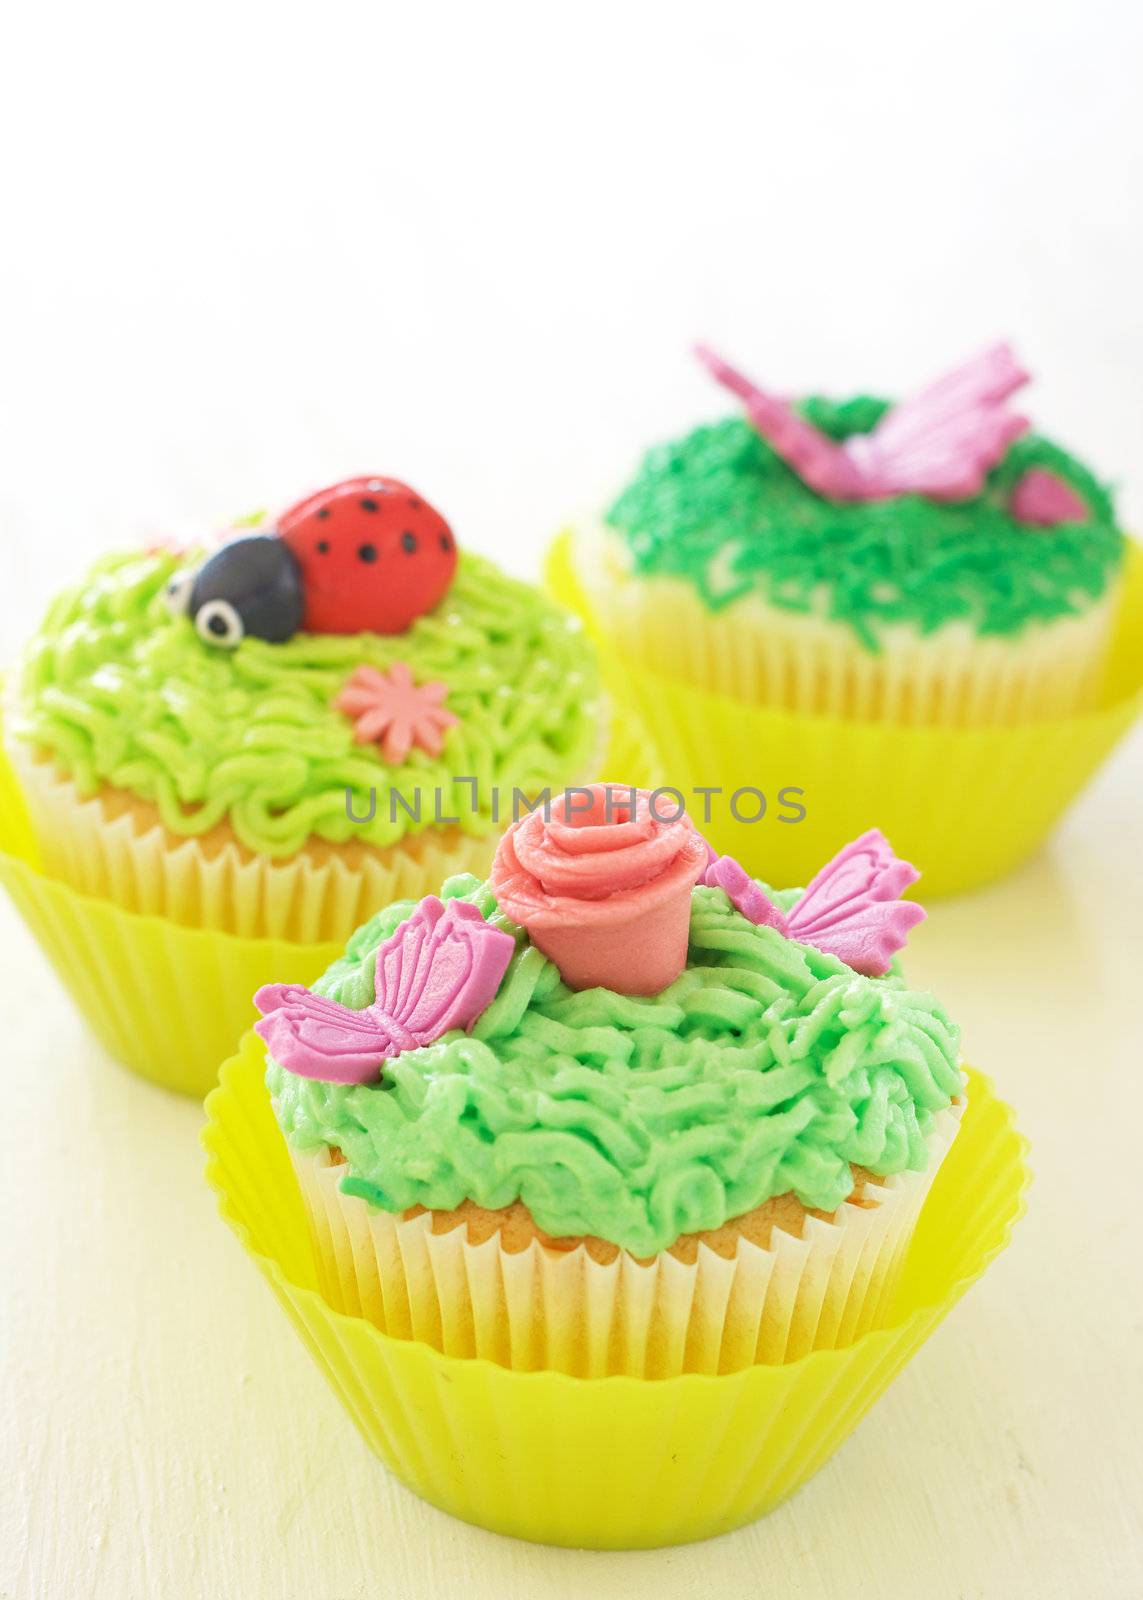 Vanilla cupcakes with buttercream icing and various decorations on white background